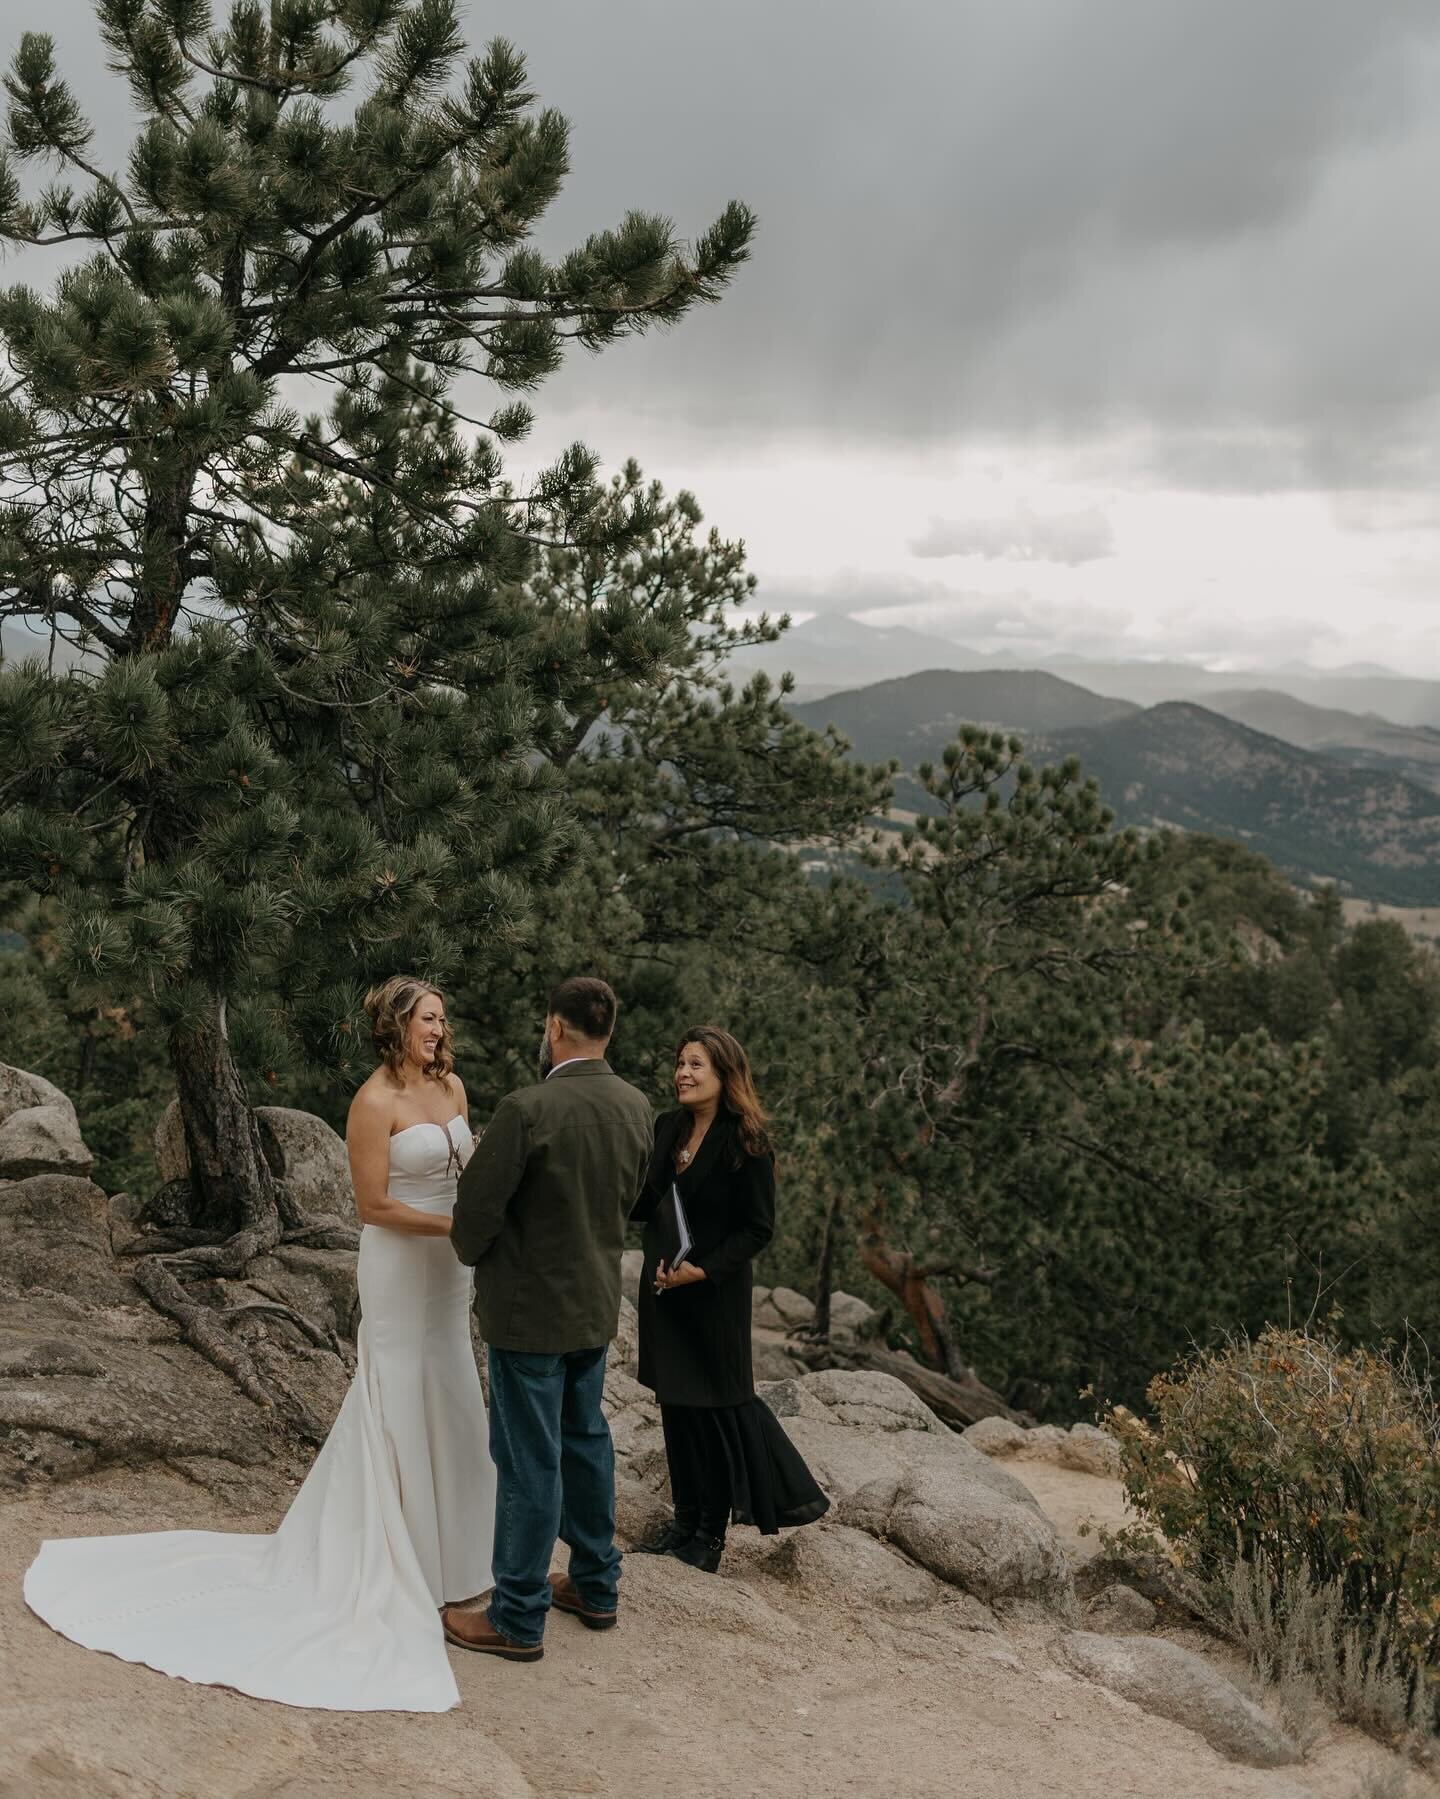 Is it just me or is anyone else looking forward to the days getting longer SO soon?! I&rsquo;m ready for elopement season to be in full swing and be back out on the trails getting folks married! Elopement ing this year in Colorado and need a photogra